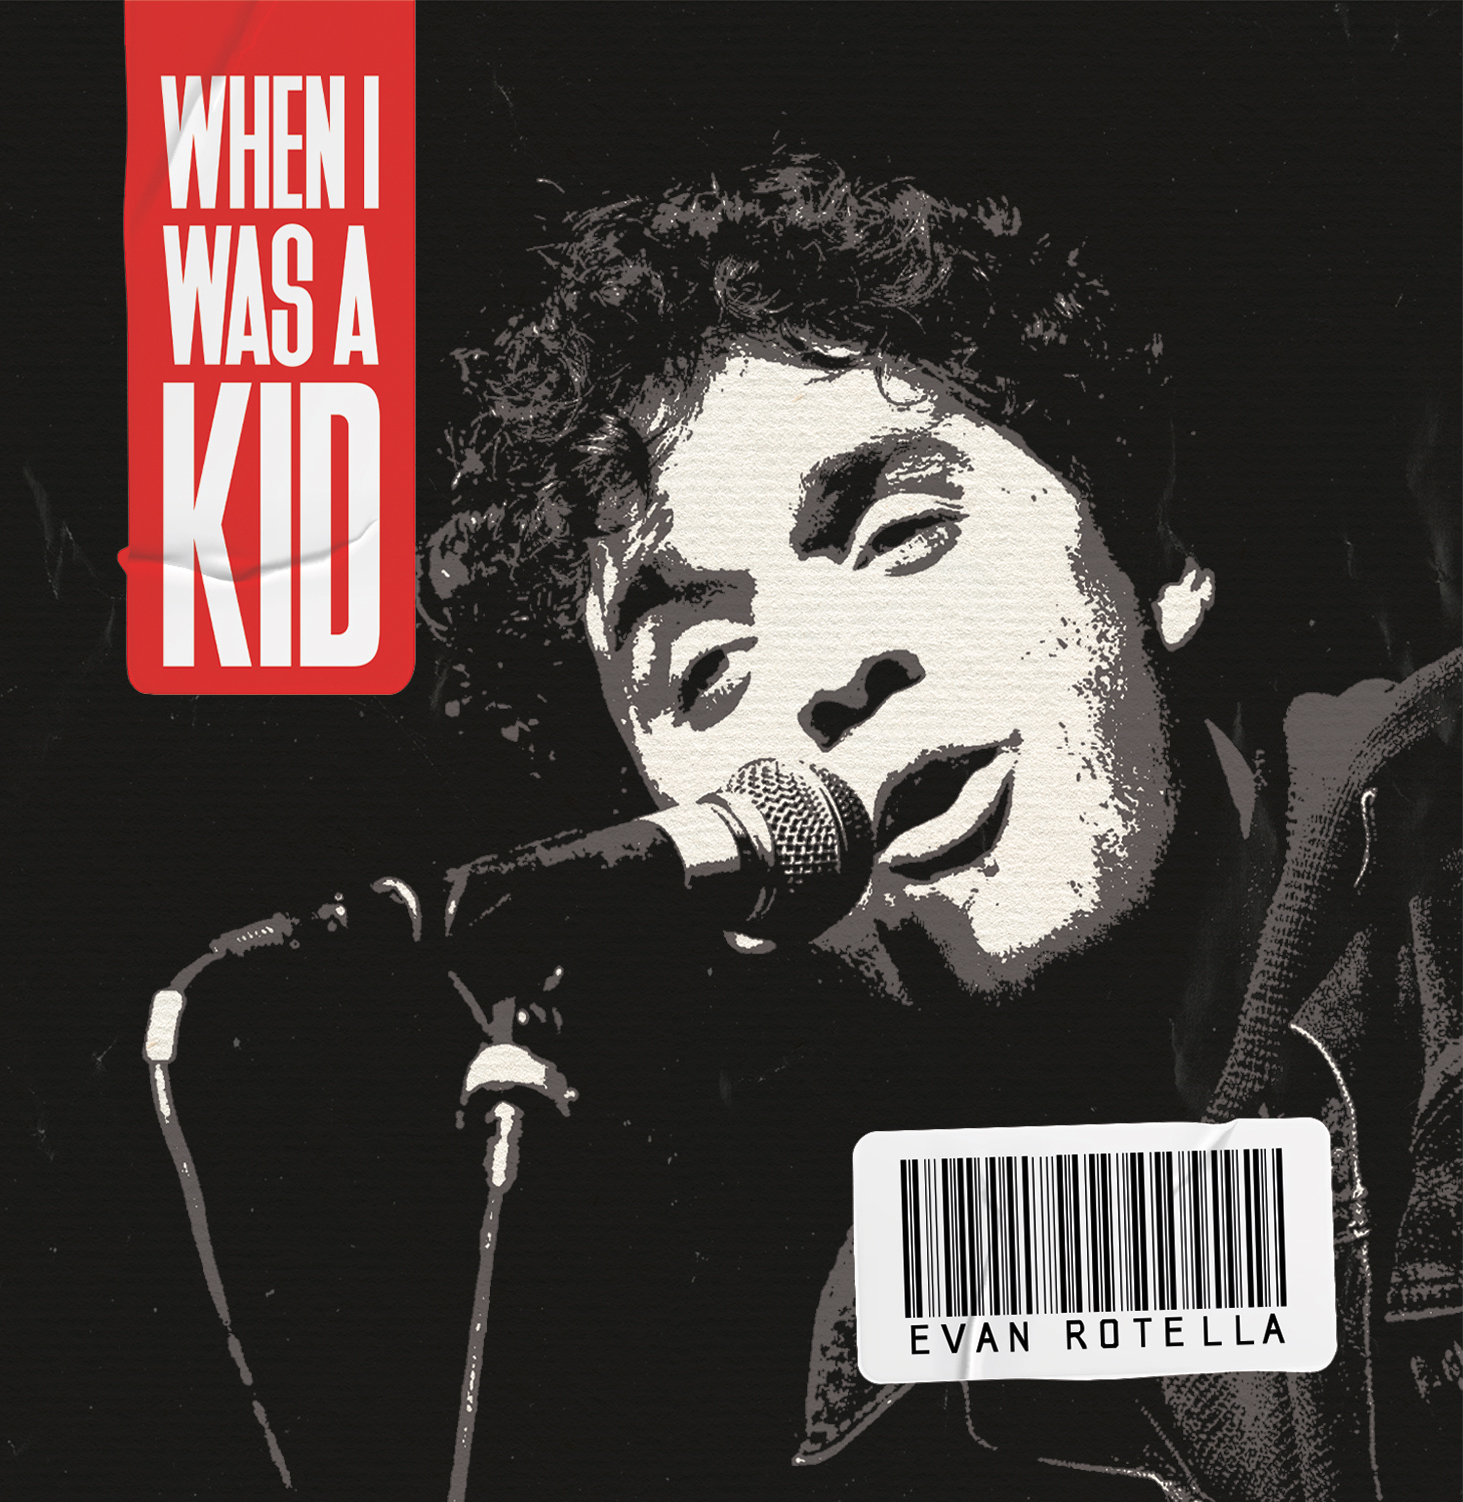 When I Was A Kid - CD Single